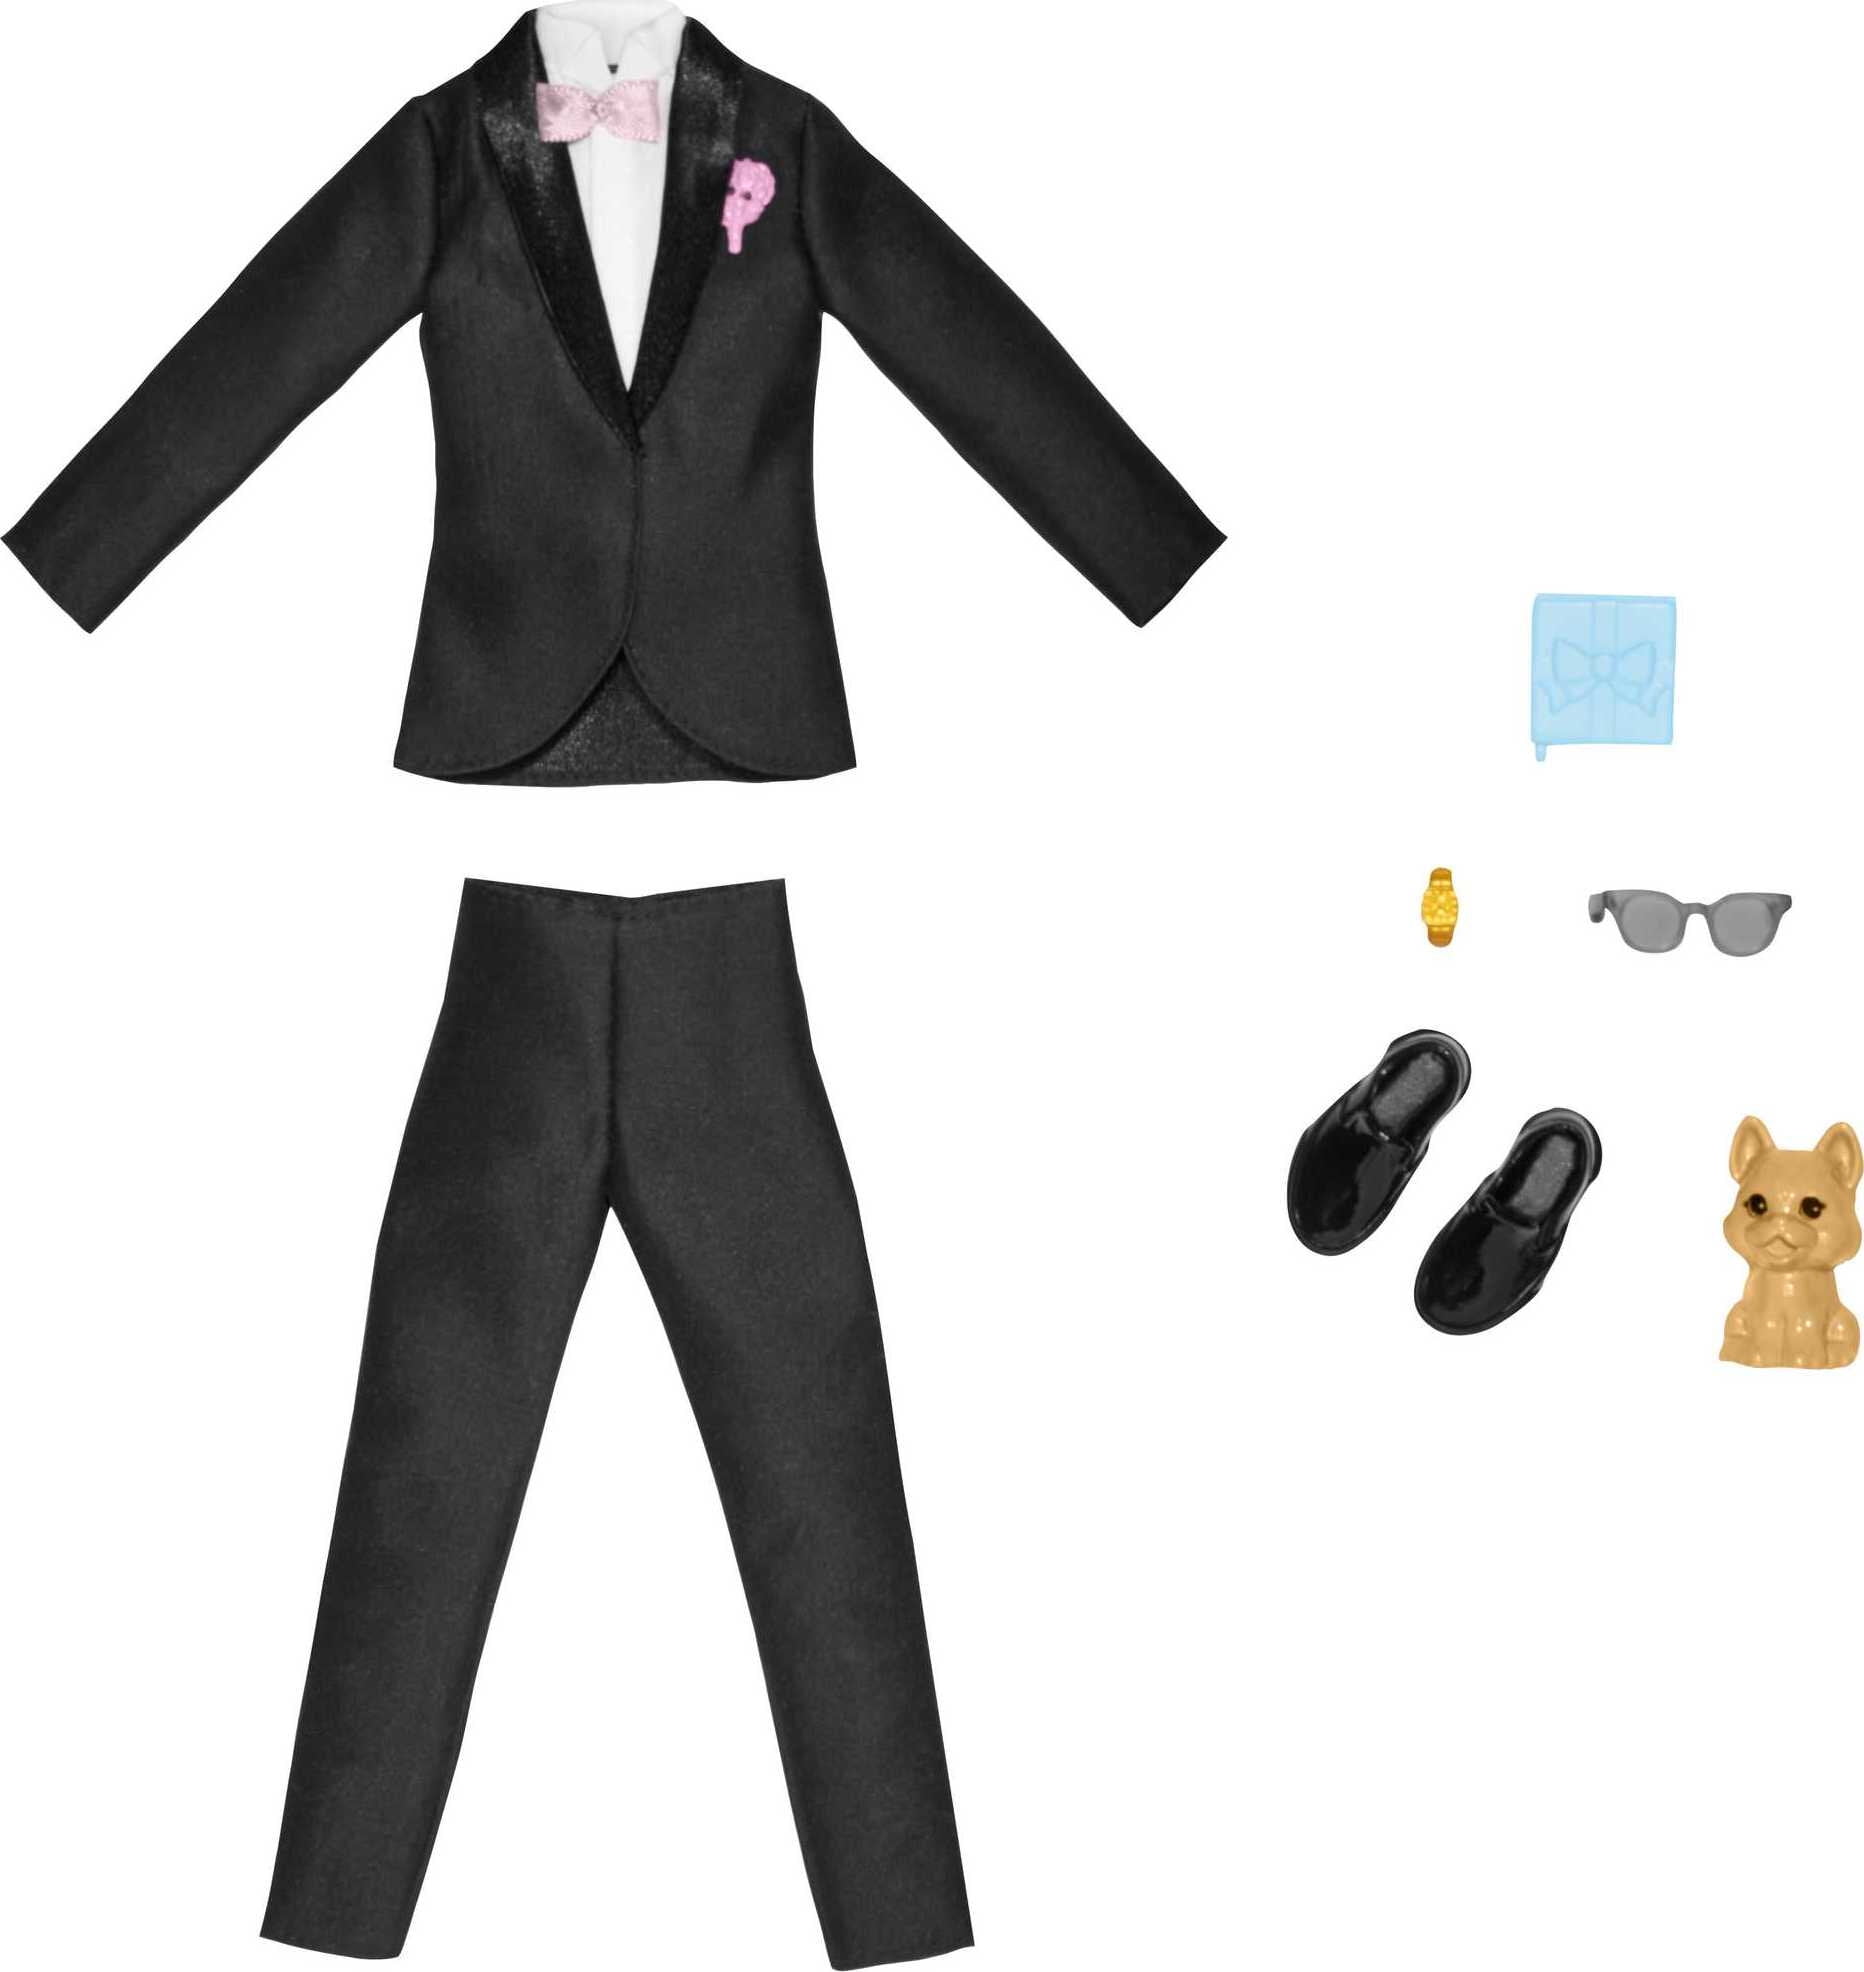 Barbie Fashions Ken Doll Clothing, Groom with Tuxedo, Puppy and Accessories